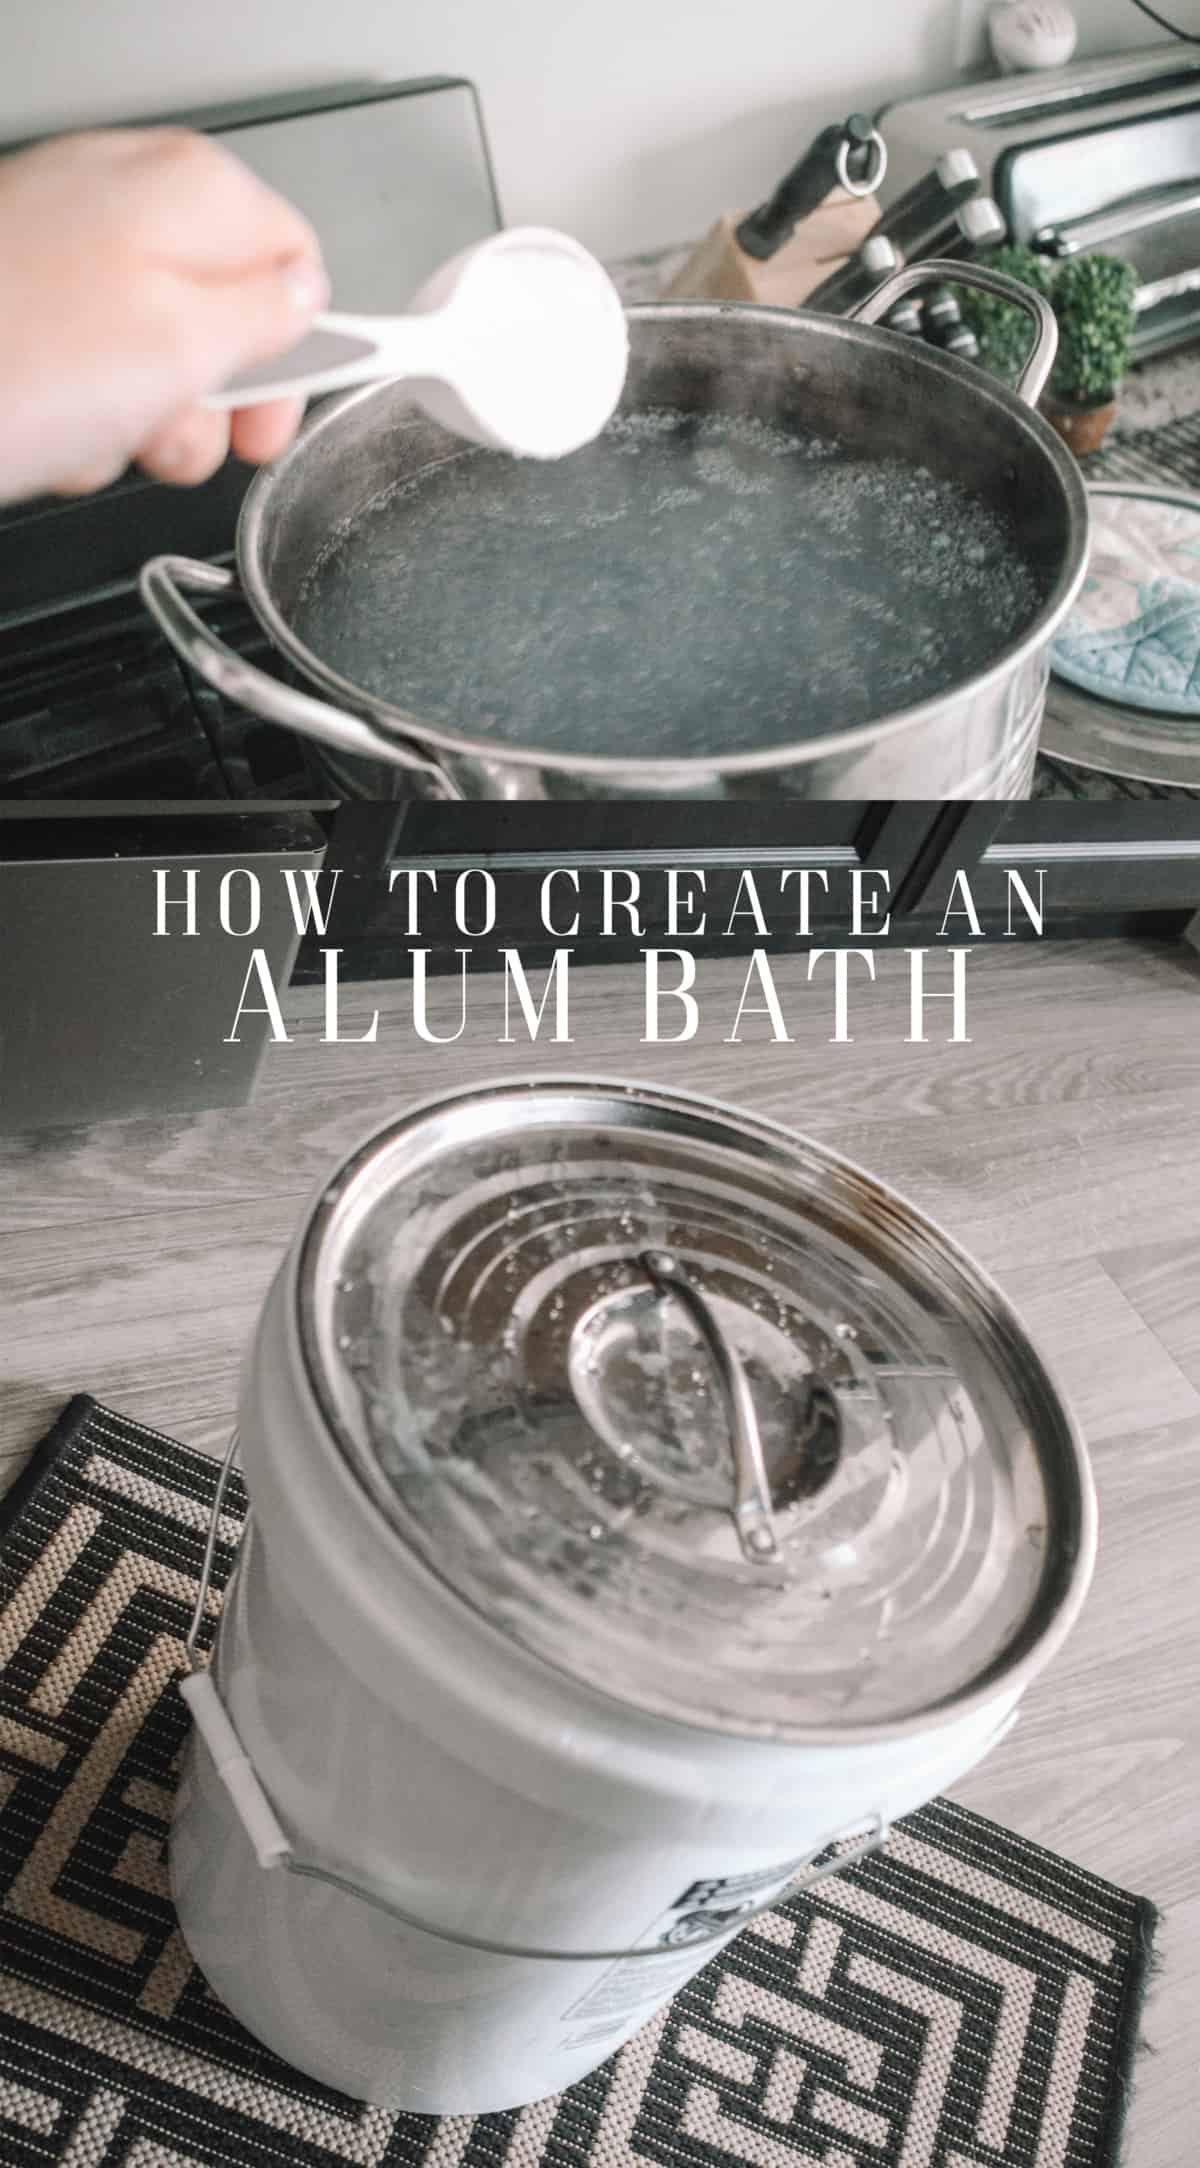 Alum baths are a must for almost all natural dye. I break down how I create my alum baths for you here so you can start dyeing too.